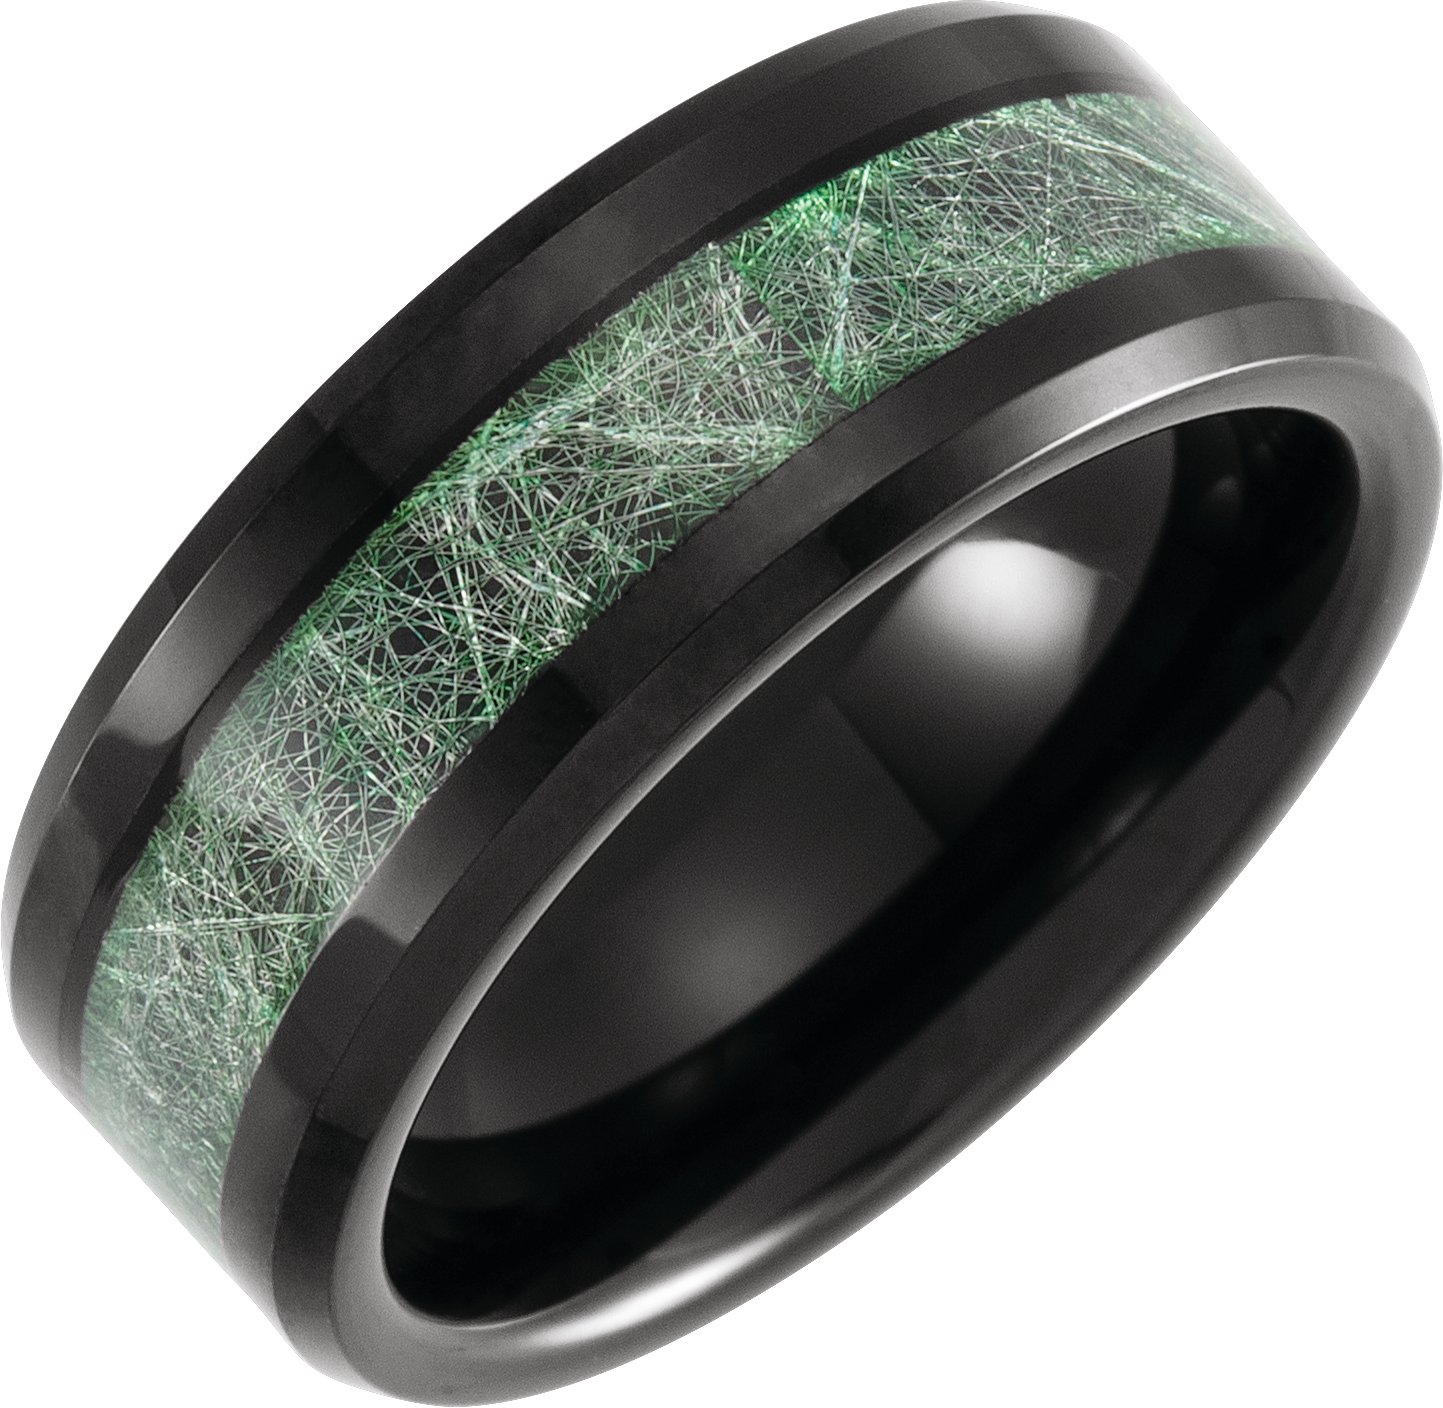 Tungsten 8 mm Beveled Band with Imitation Meteorite Inlay Size 10